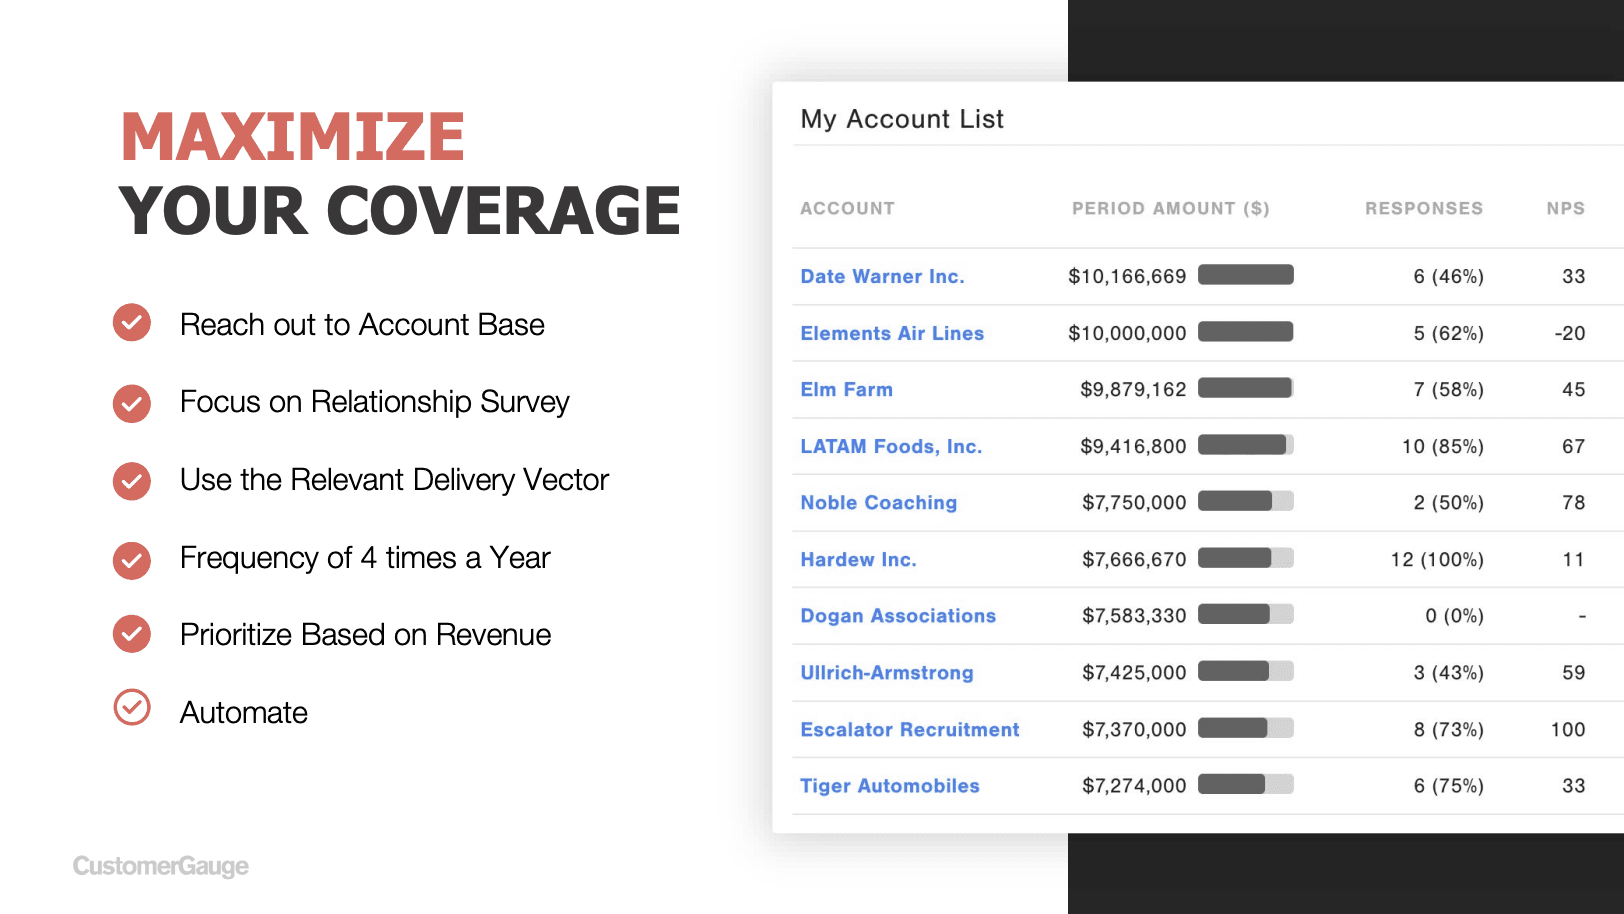 Maximize your coverage NPS